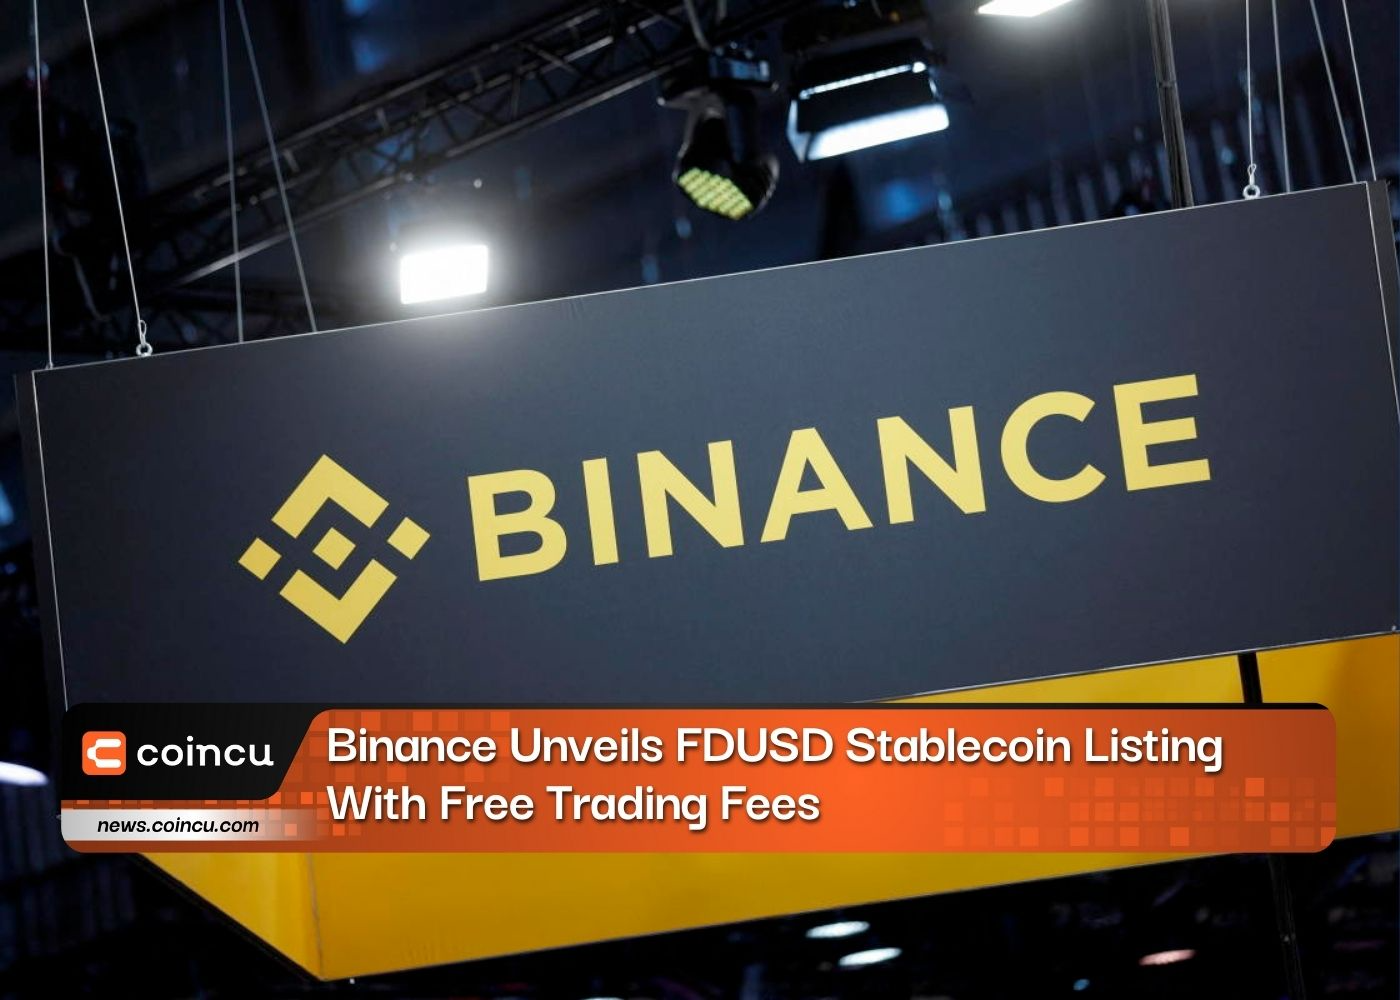 Binance Chain Will Charge 'Close' To $K to List New Coins | coinlog.fun